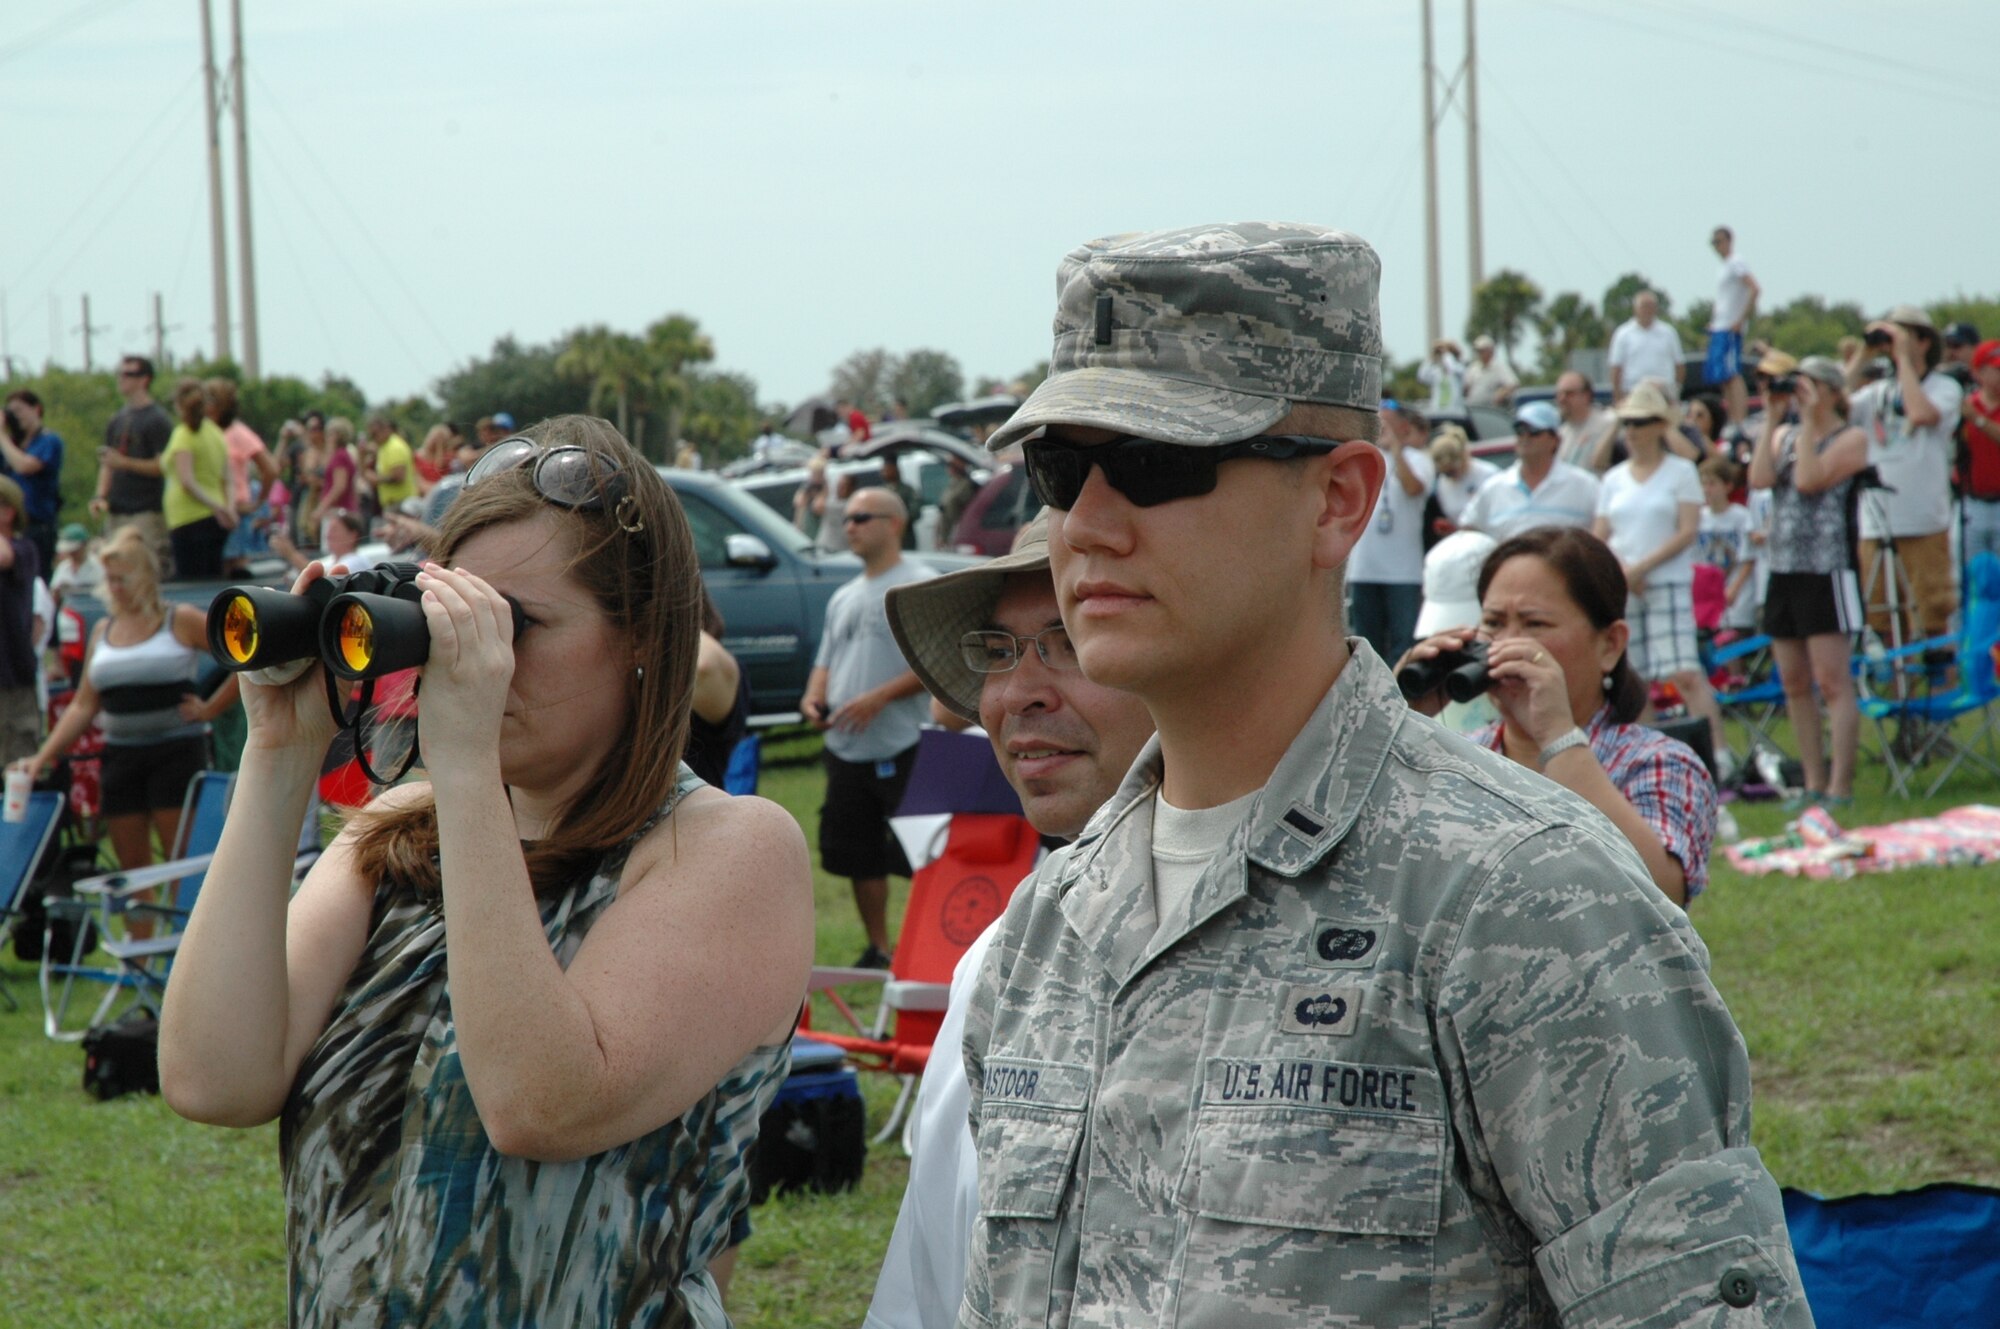 Crowds of U.S. Air Force members and their guests at Cape Canaveral AFS, Fla., watch the final launch of a space shuttle July 8, 2011, from the 45th Space Wing VIP Viewing Area on the NASA Causeway, as Shuttle Atlantis roars into the sky. The success of STS-135 marked the culmination of three decades of support for NASA Space Shuttle missions by the wing, other Air Force units and government agencies, and their mission partners. (U.S. Air Force photo/Eric Brian)